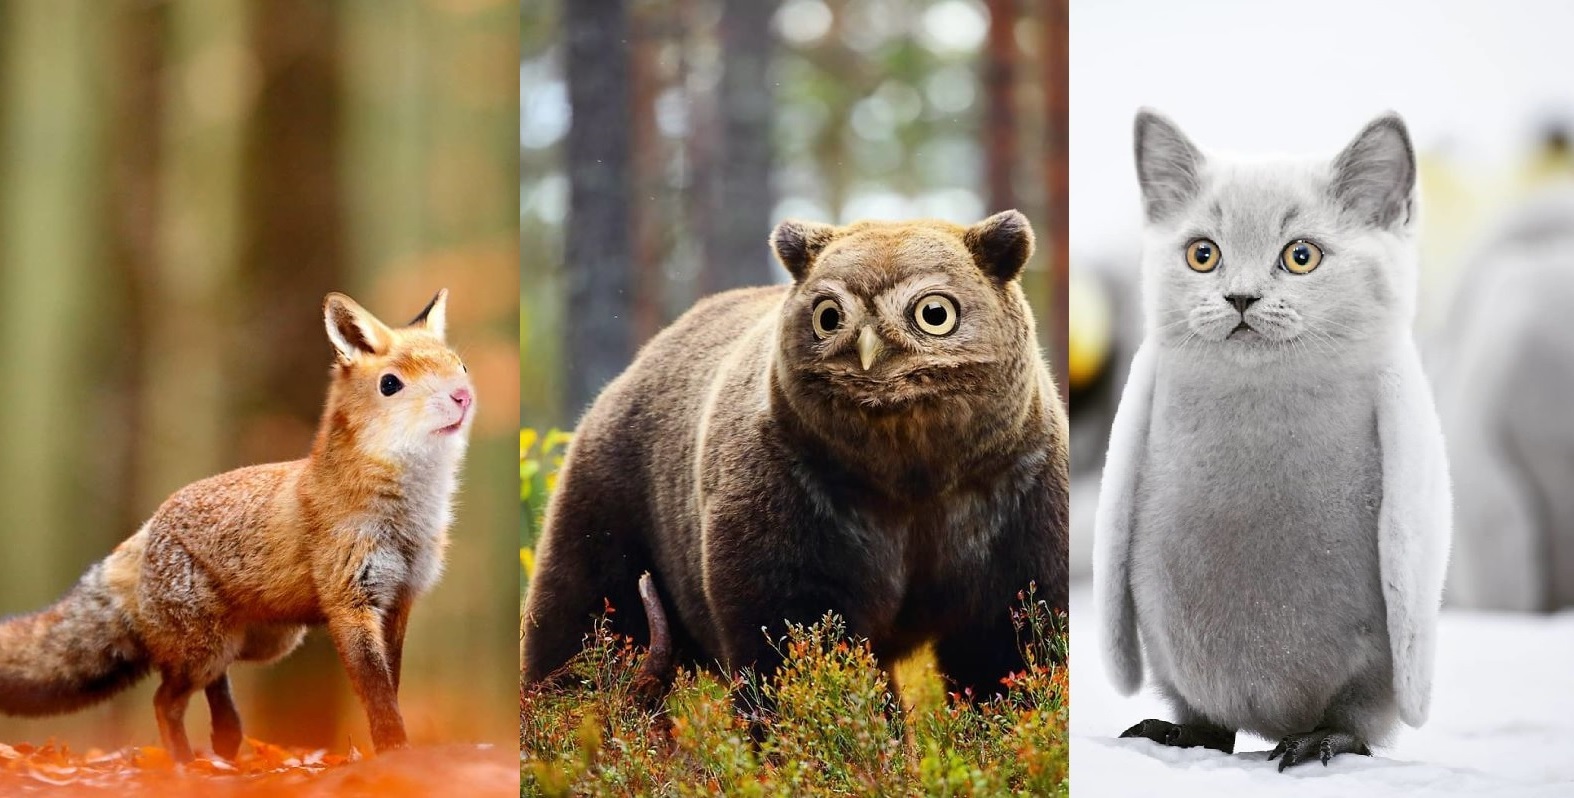 LOL! This Artist's Imaginary Hybrid-Animals Will Make Your Day!